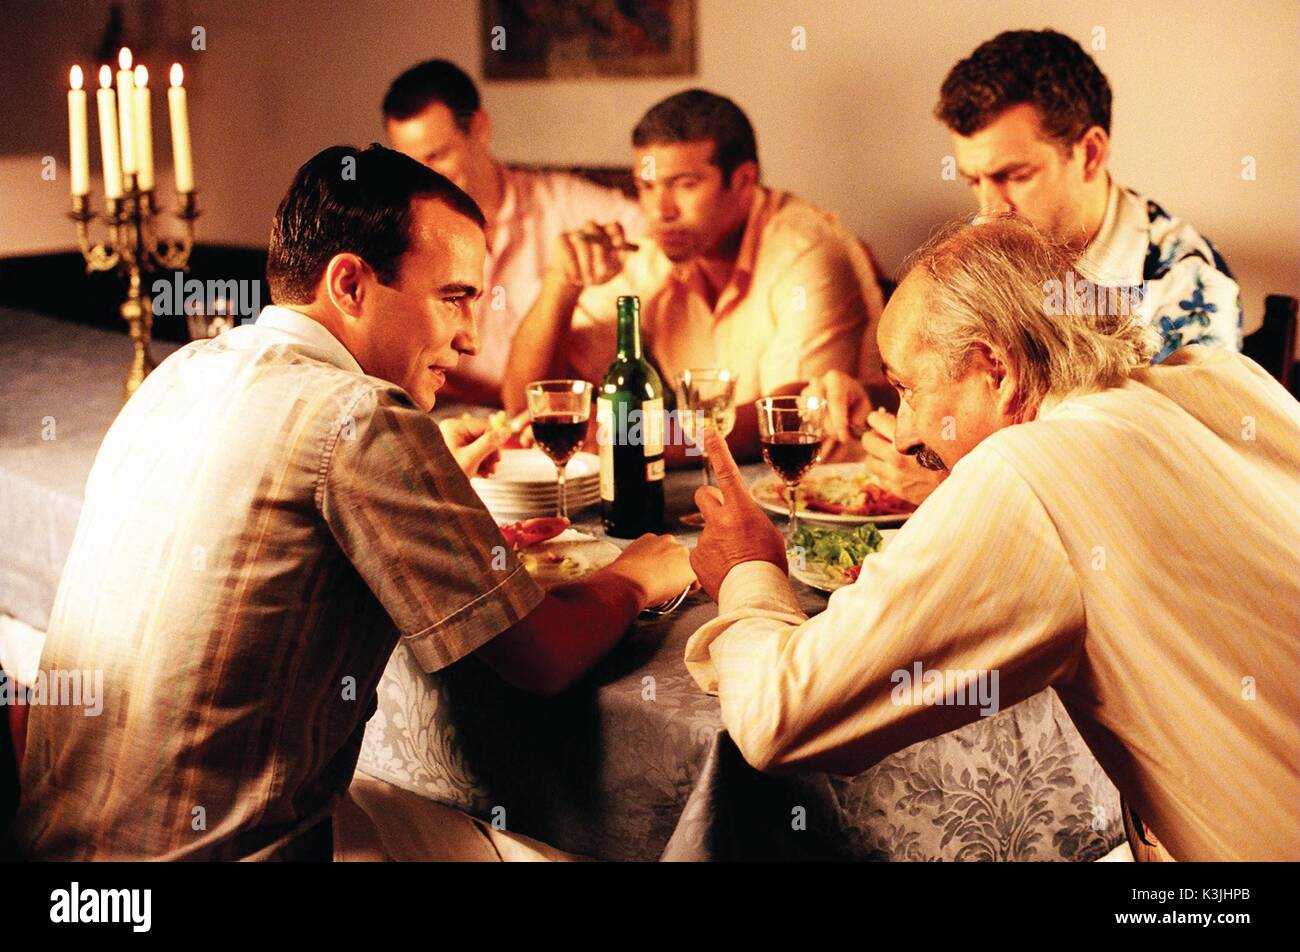 THE BUSINESS Roland Manookian as Sonny, Arturo Venegas as The Mayor, Danny Dyer as Sammy, Tamer Hassan as Charlie.     Date: 2005 Stock Photo